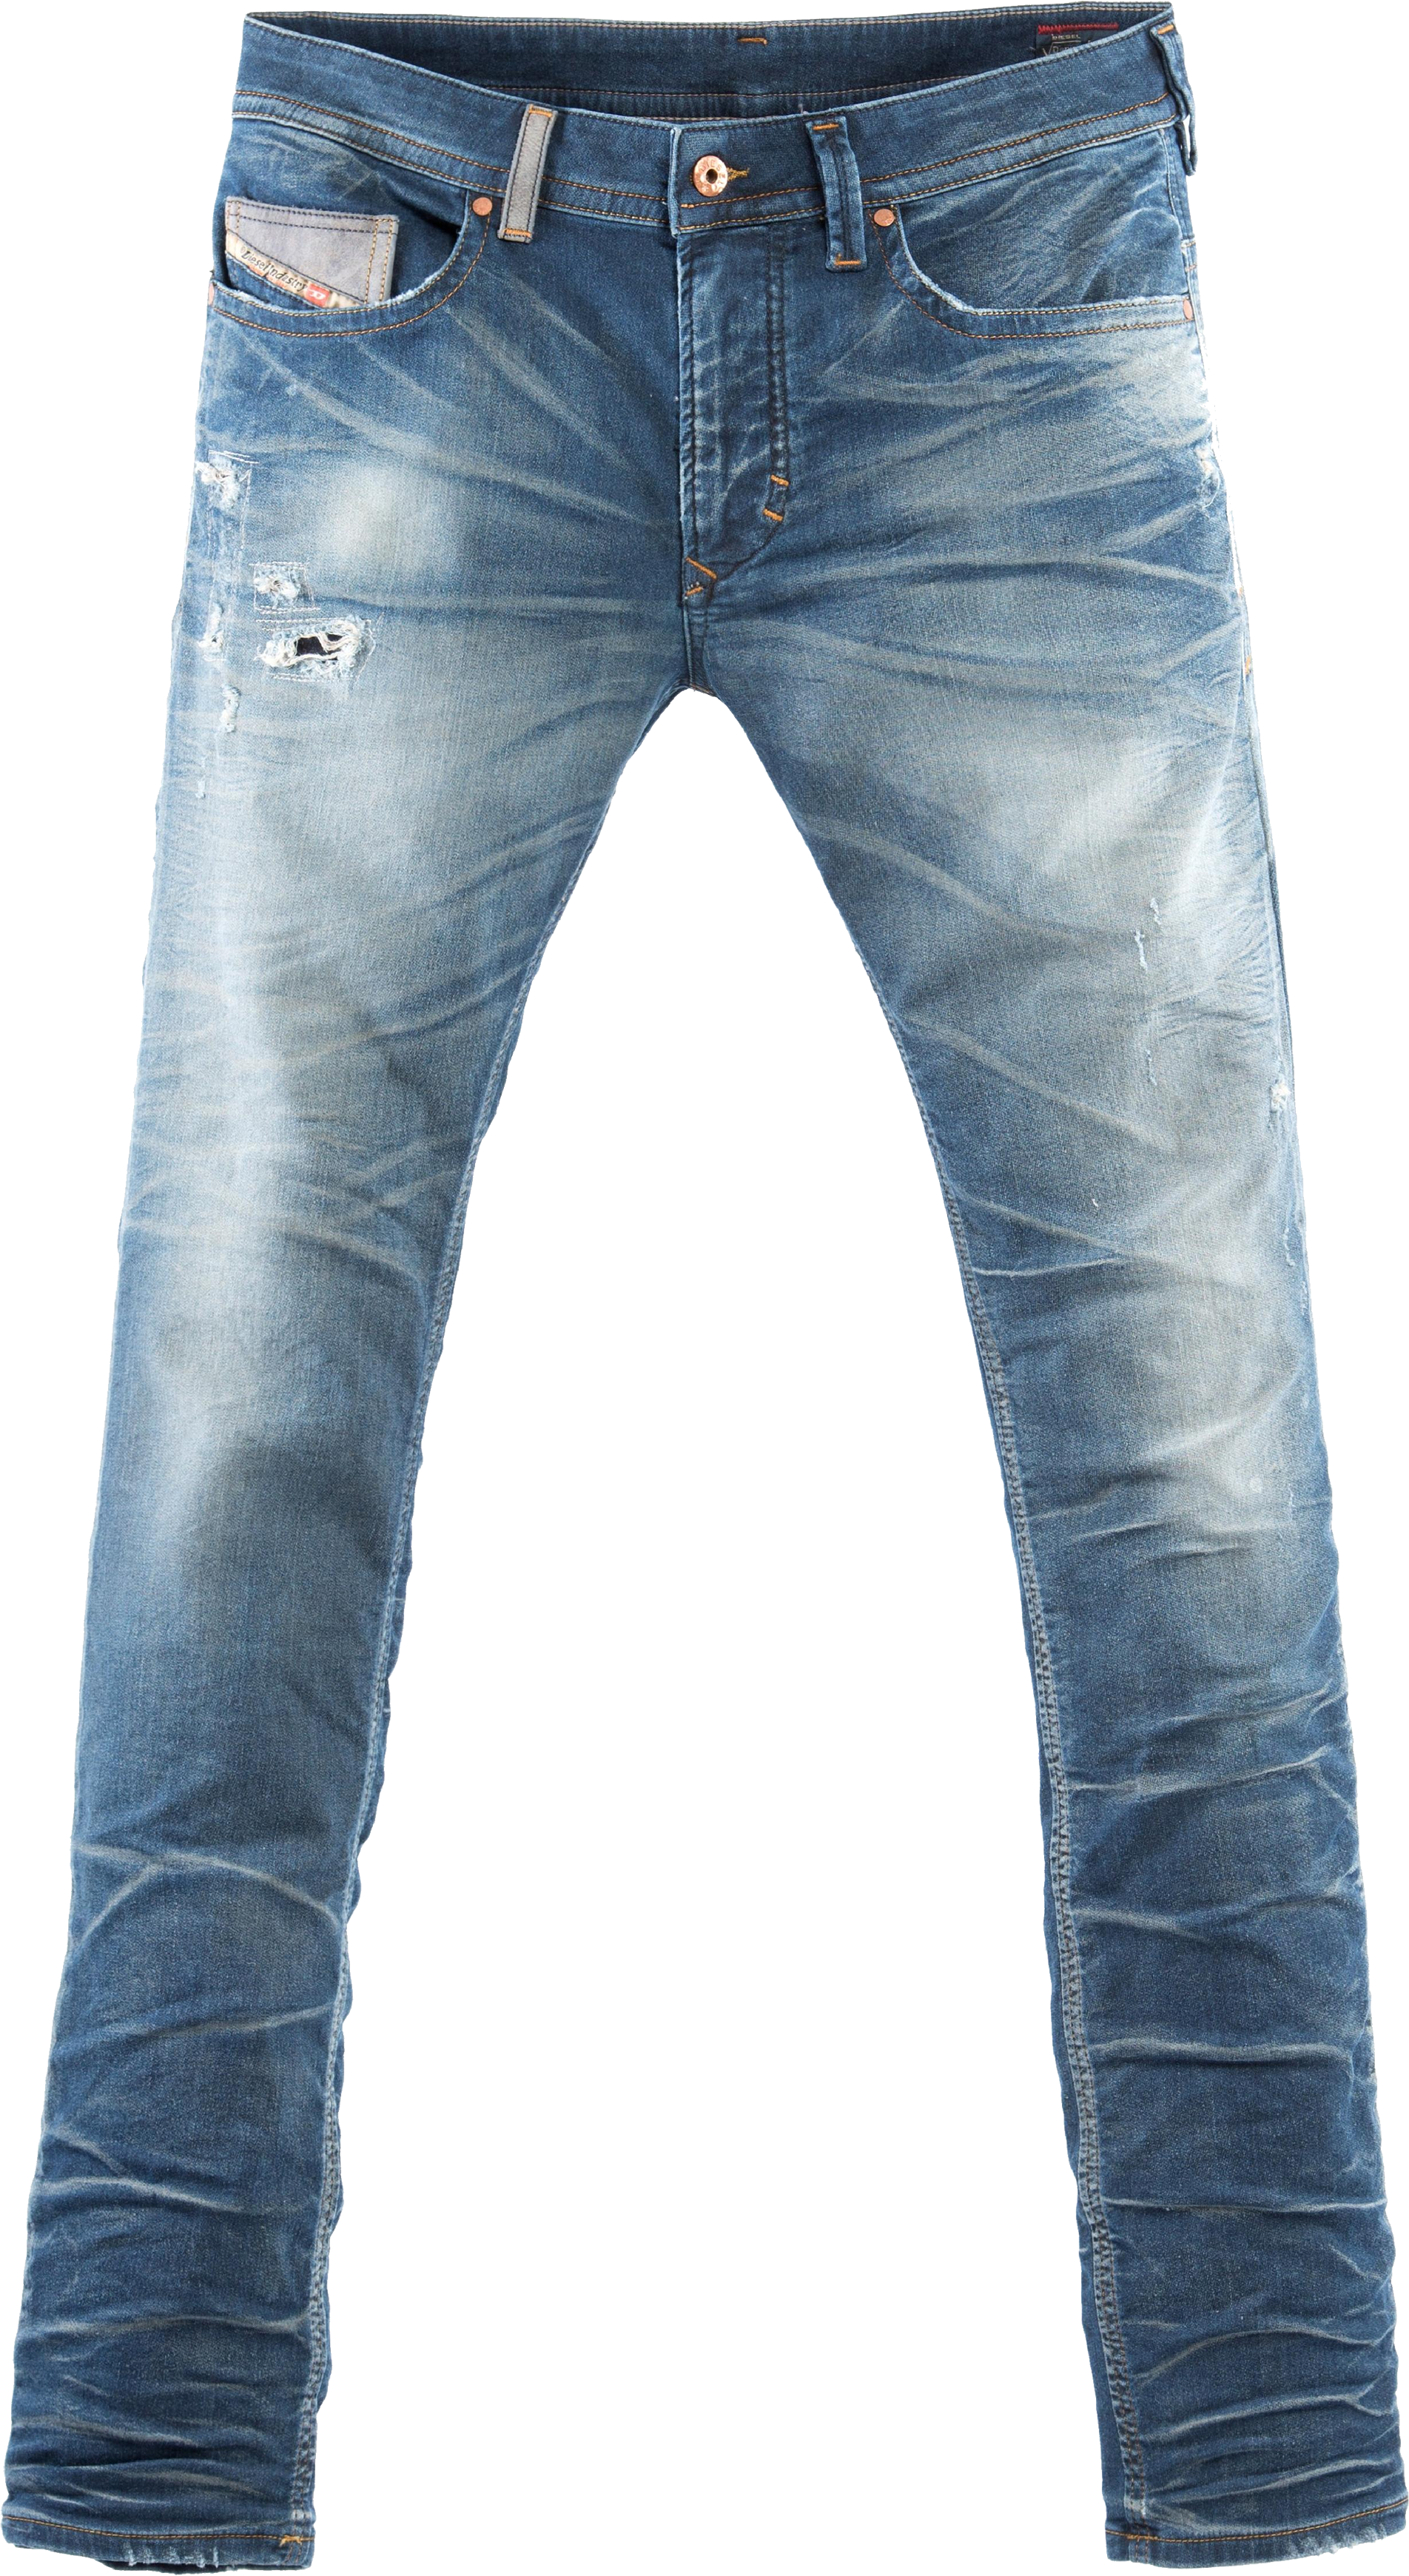 Jeans PNG images Download 